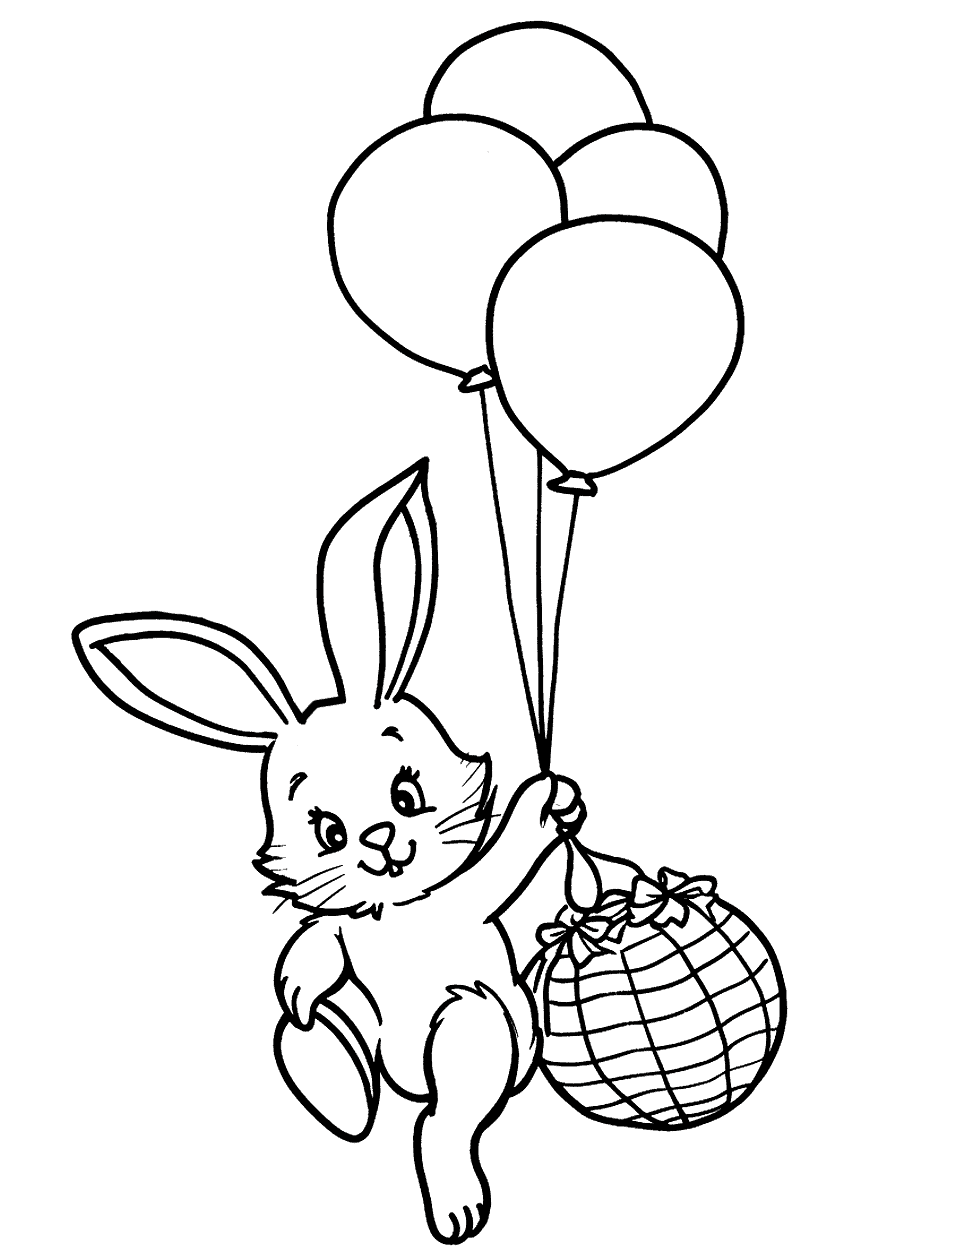 Bunny's Balloon Journey Easter Bunny Coloring Page - A cute bunny tied to a bunch of balloons, floating slightly above the ground.